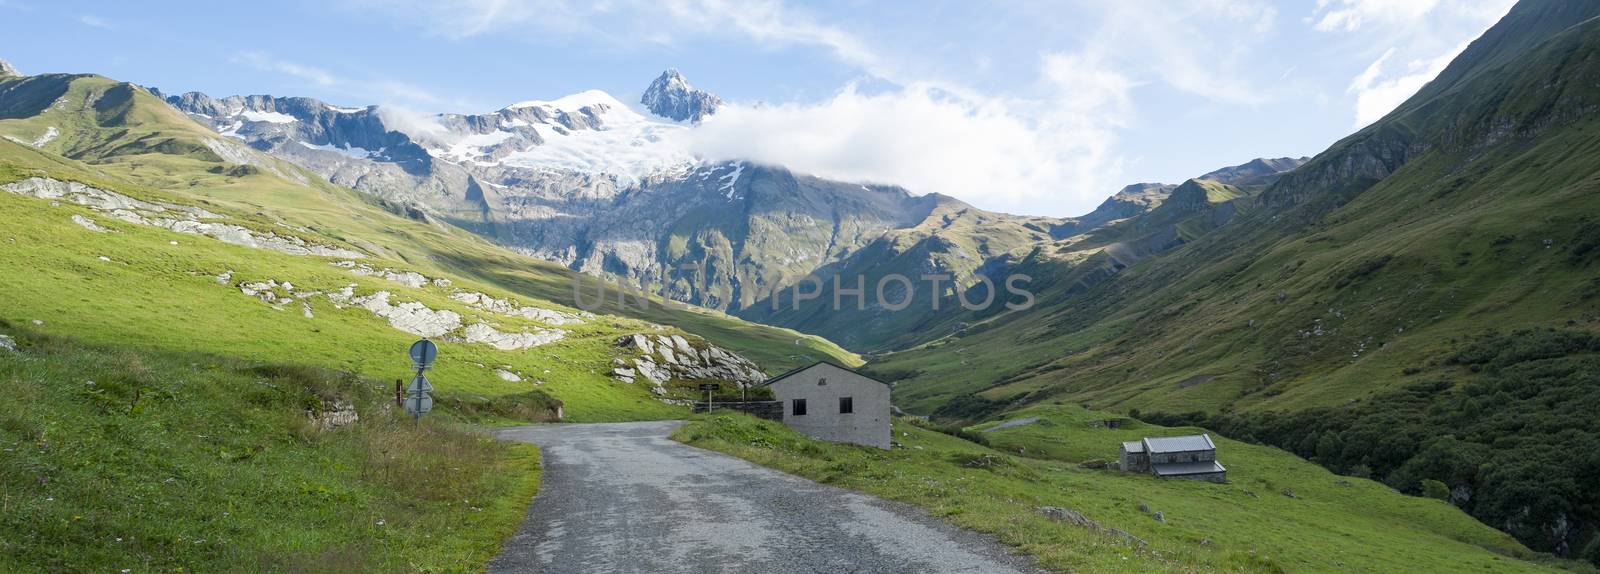 VILLE DES GLACIERS, FRANCE - AUGUST 27: Panoramic of chalets with Glacier Needles. The region is a stage at the Mont Blanc tour, which crosses three countries. August 27, 2014 in Ville des Glaciers.